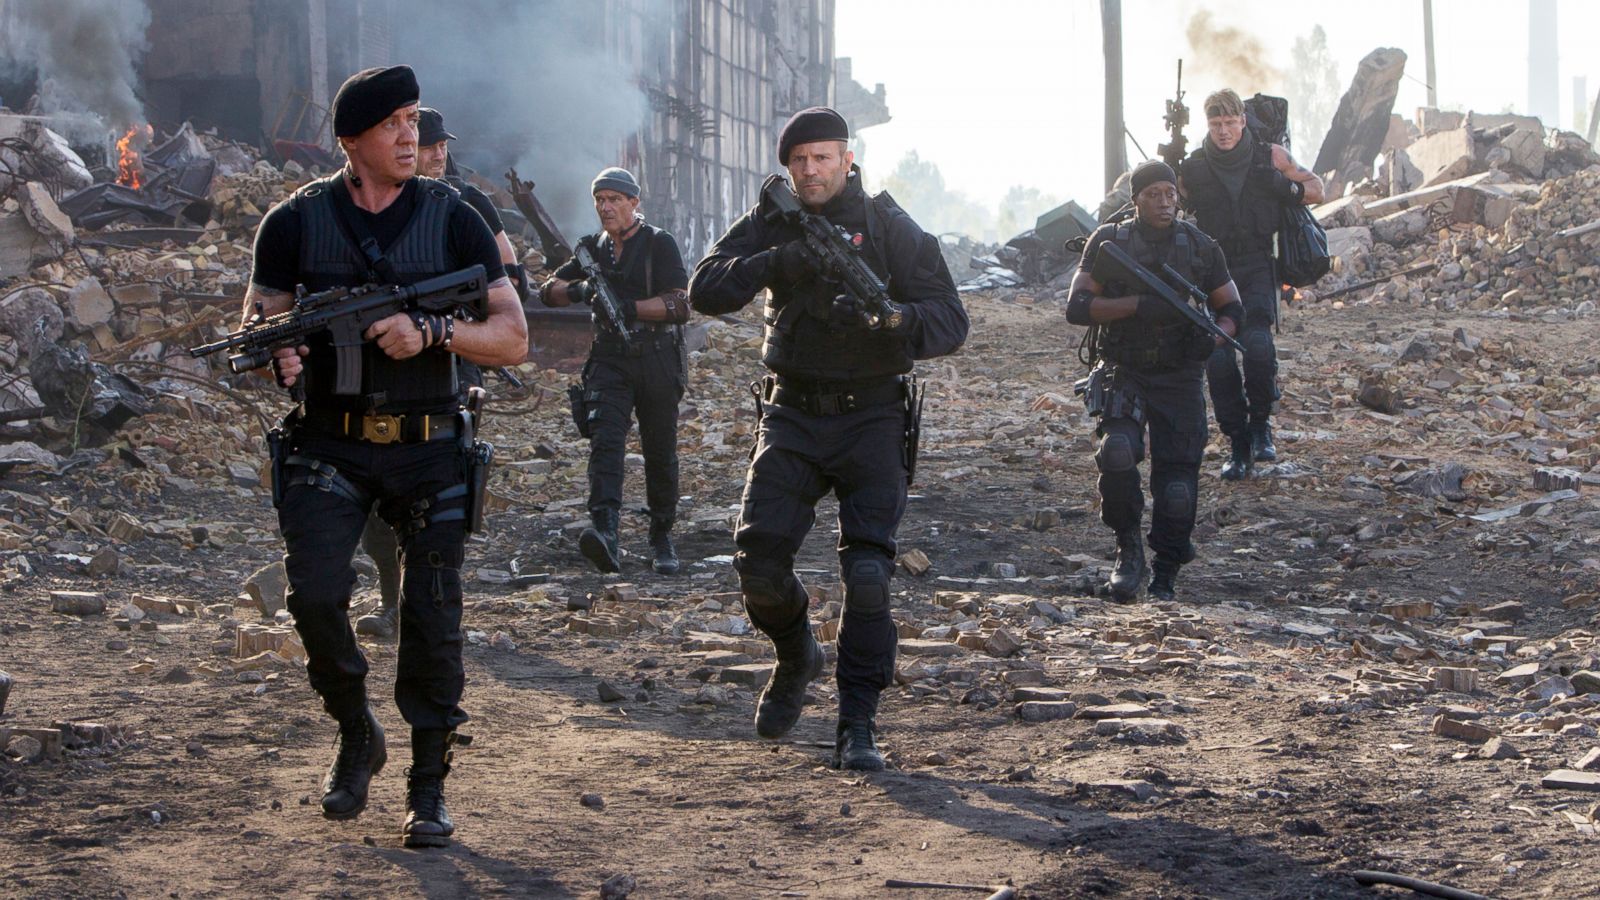 Movie Review: 'The Expendables 3' Starring Mel Gibson, Sylvester Stallone - ABC News